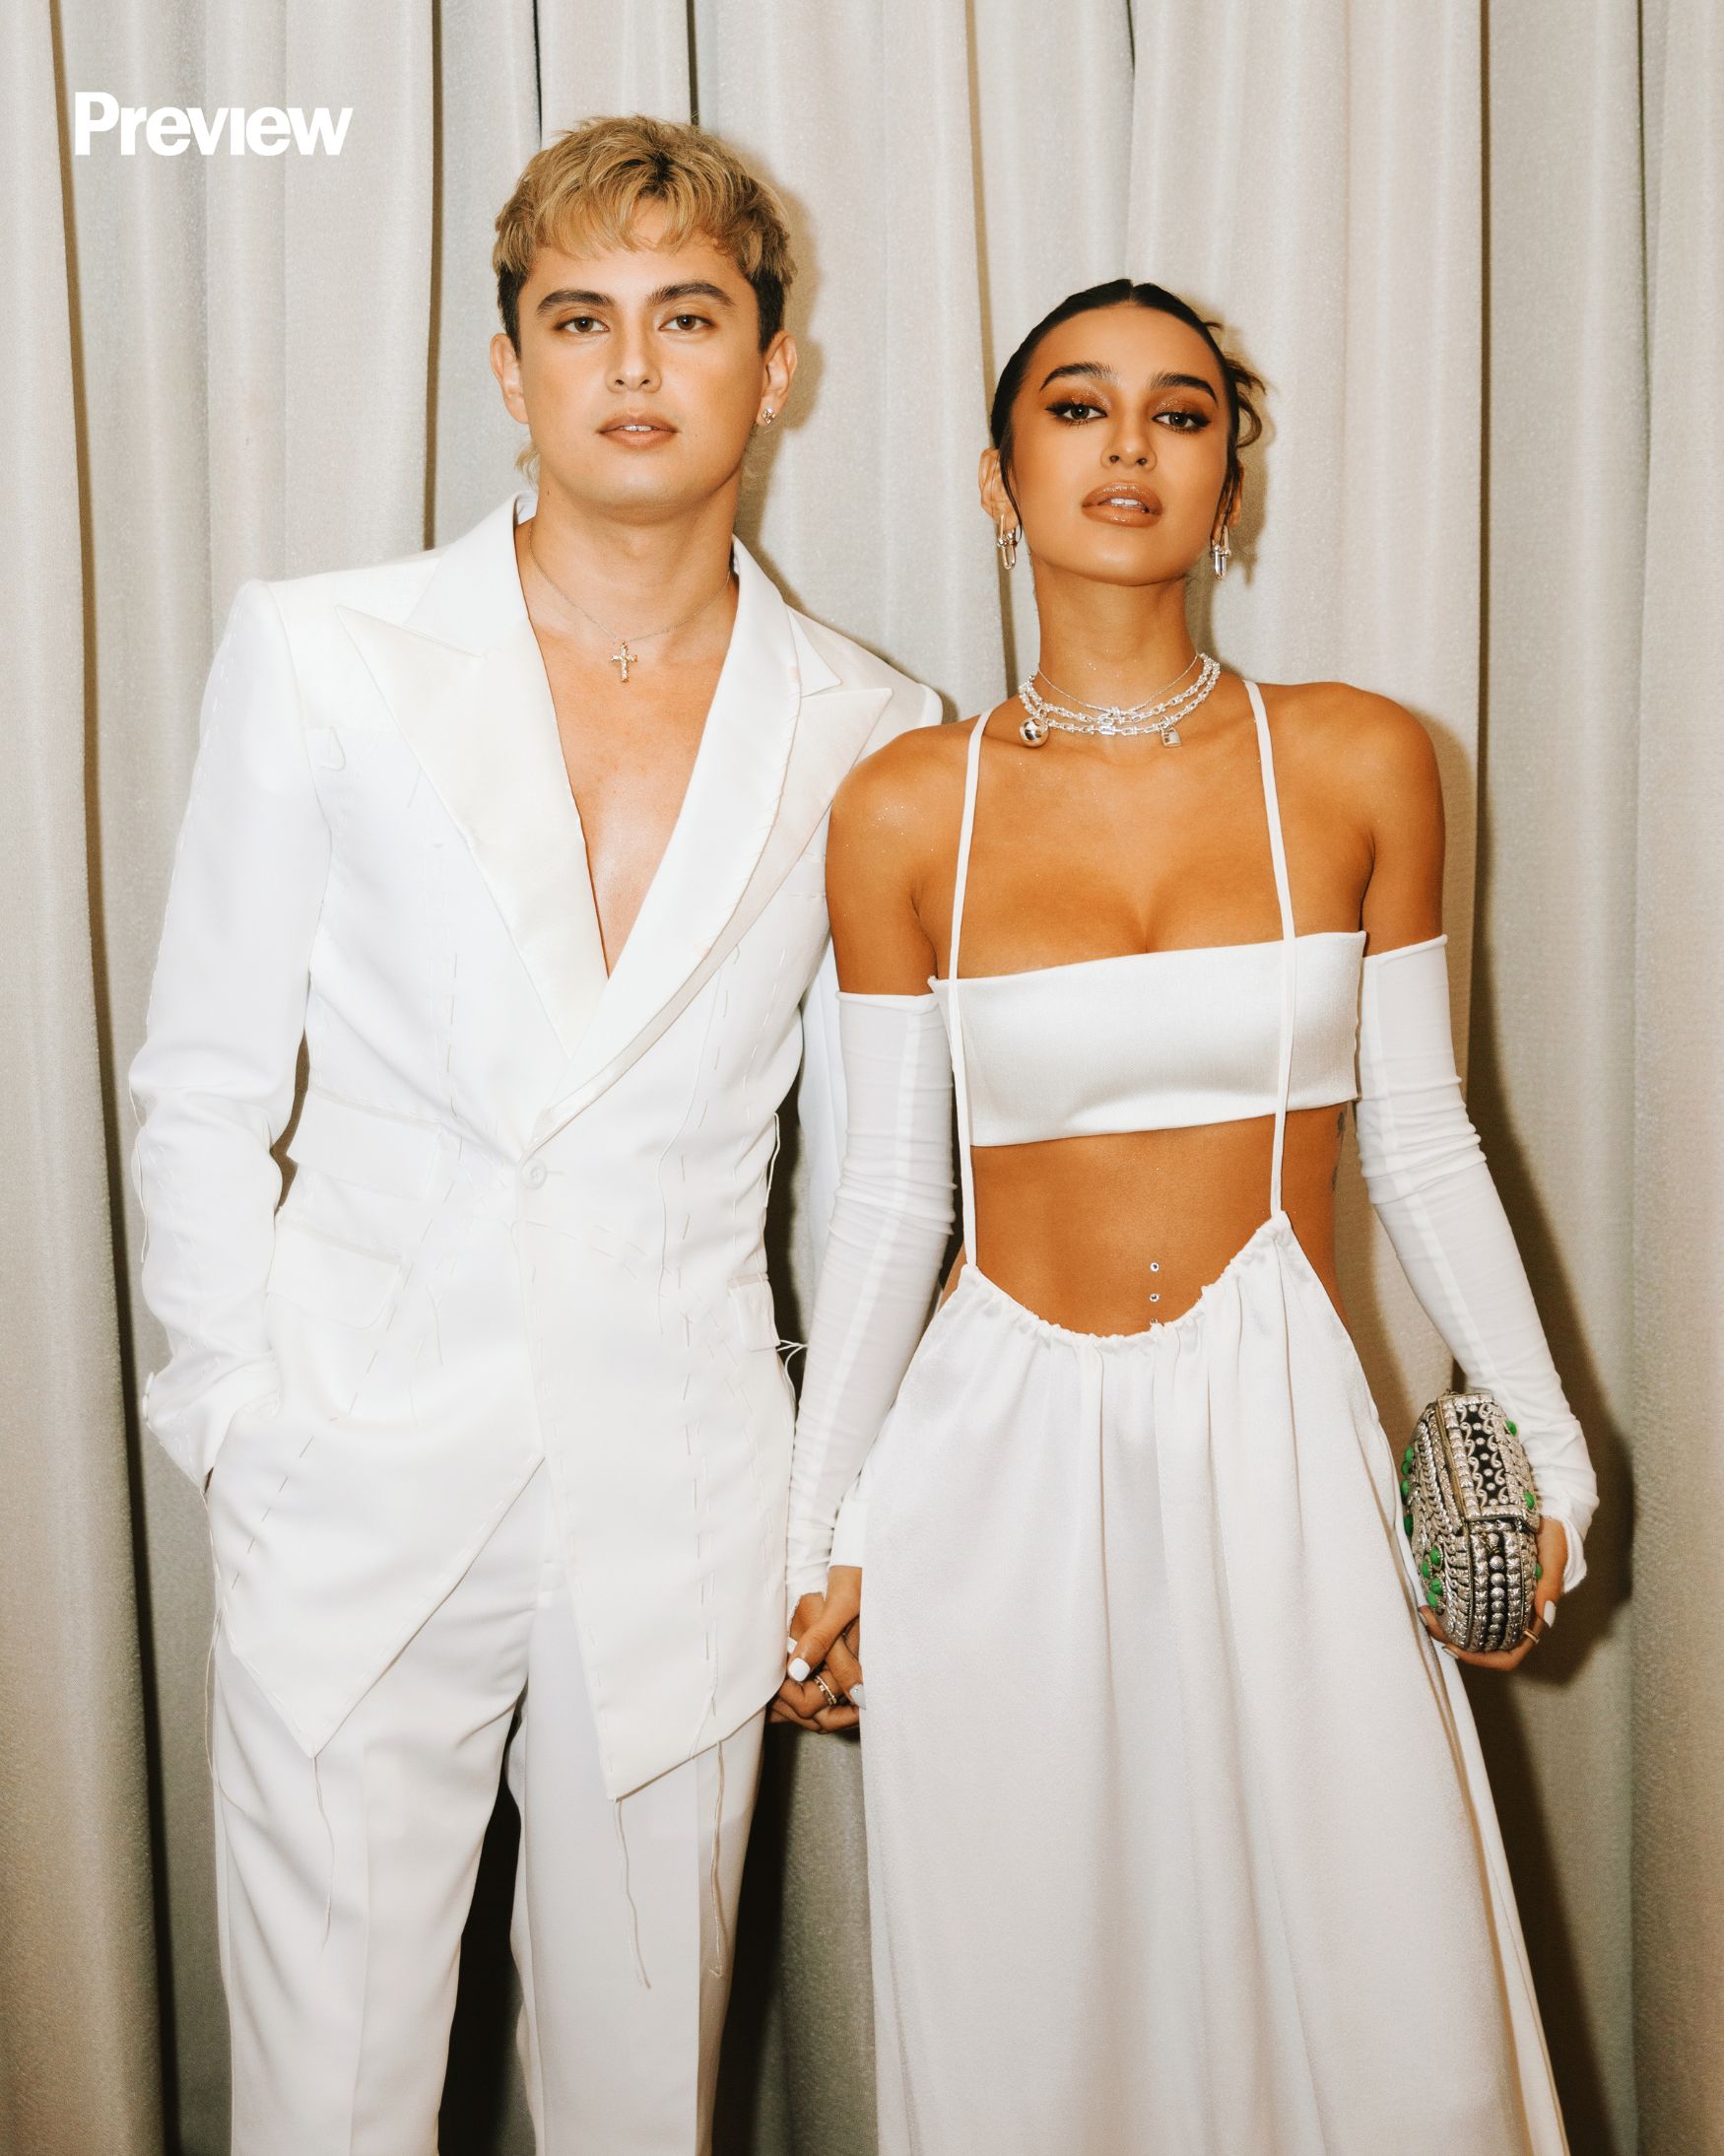 James Reid and Issa Pressman at the Preview Ball 2023 | Preview.ph